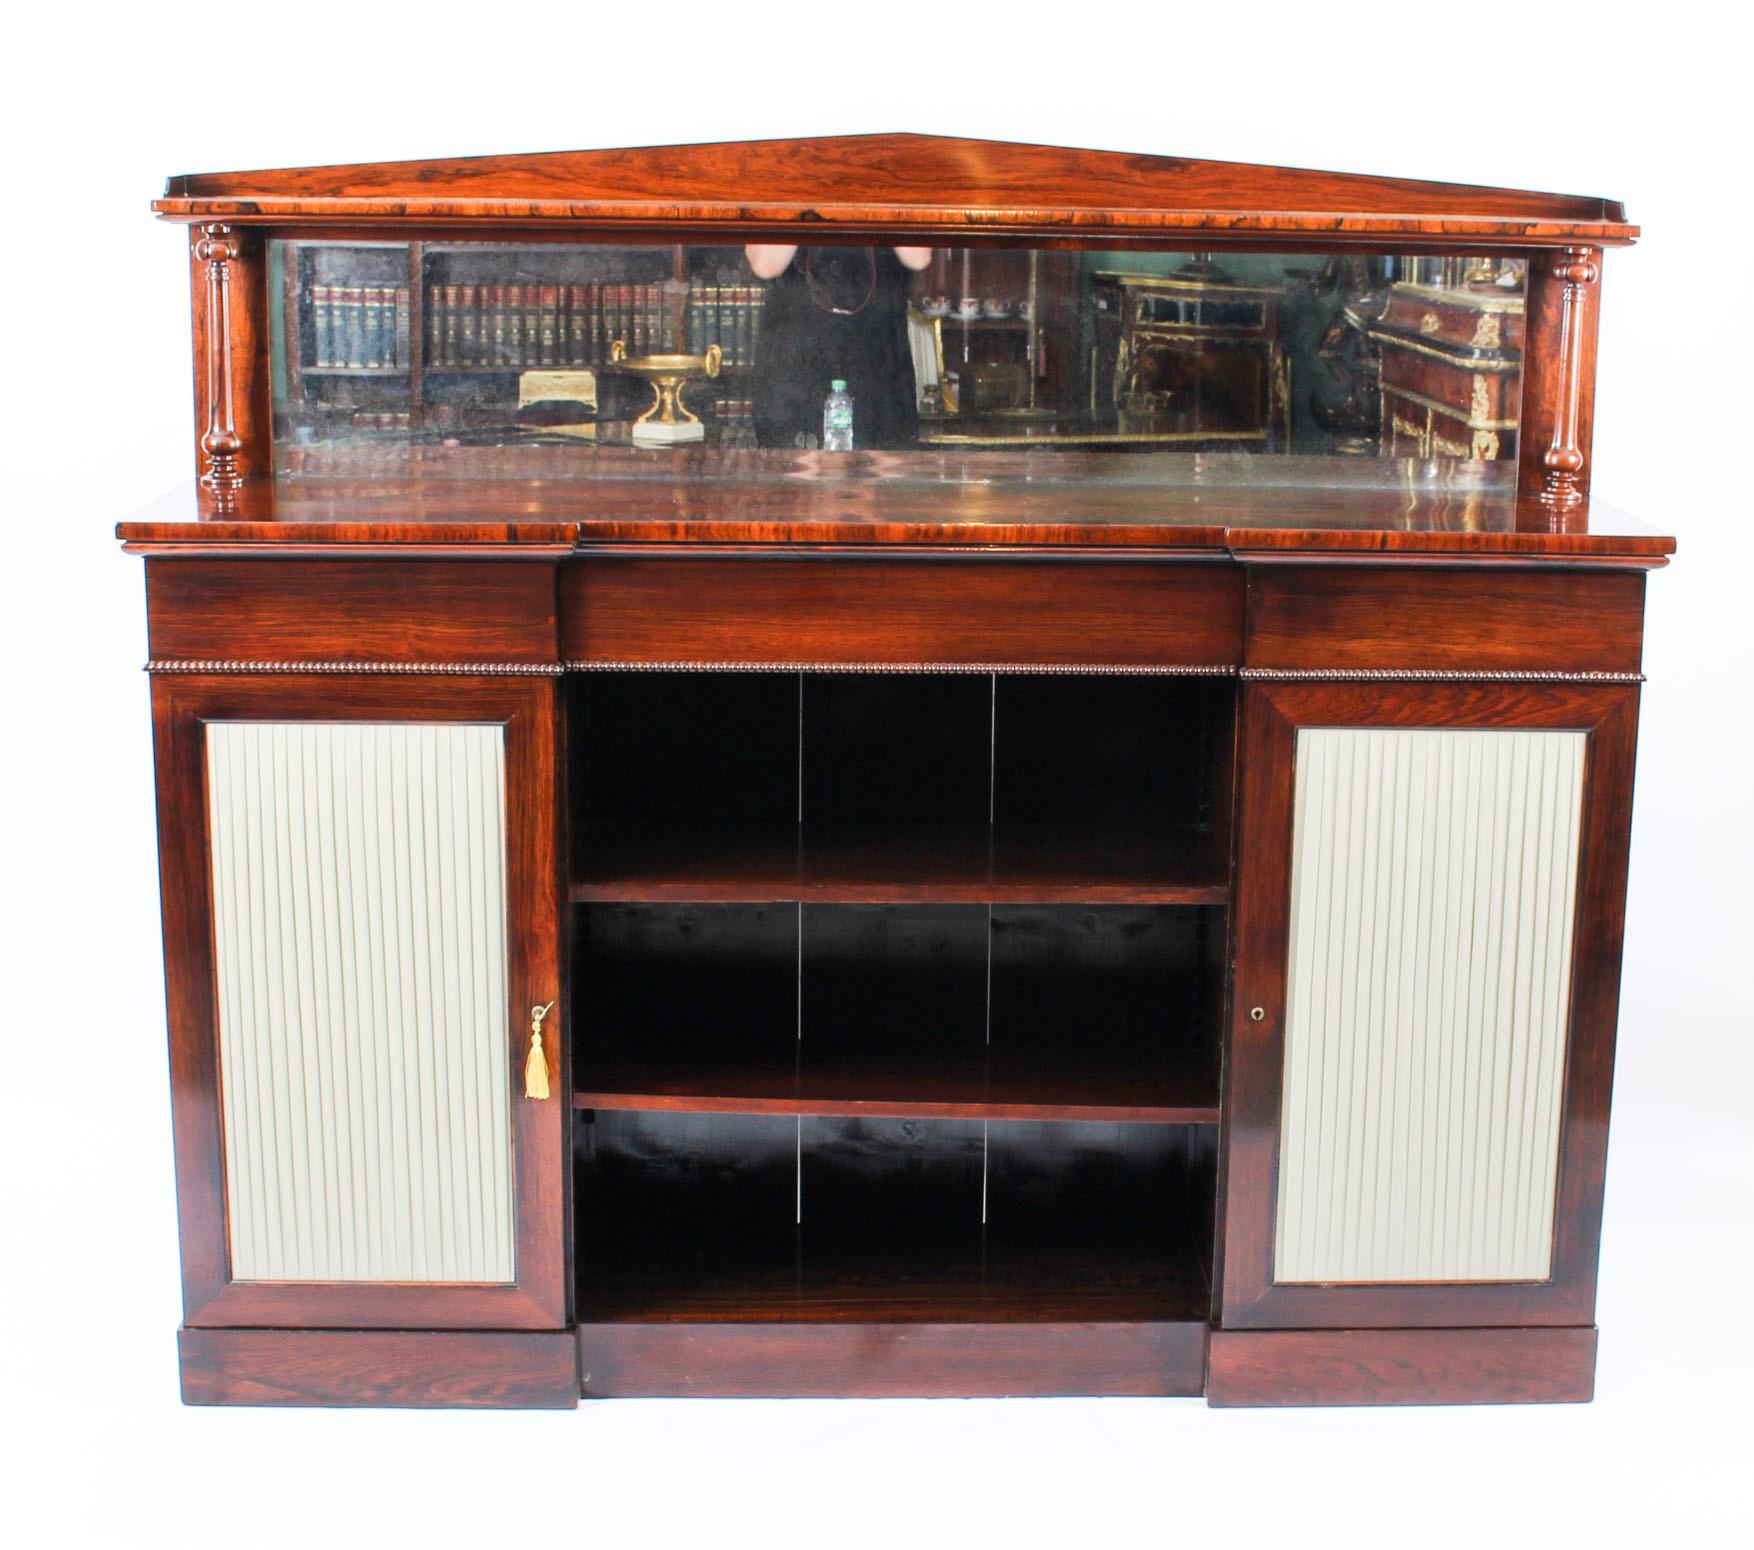 This is a beautiful antique William IV Gonçalo Alves chiffonier, circa 1835 in date.

It has a central open bookcase with adjustable shelves and plenty of space for displaying your favourite books. There are a pair of panelled doors, one on either